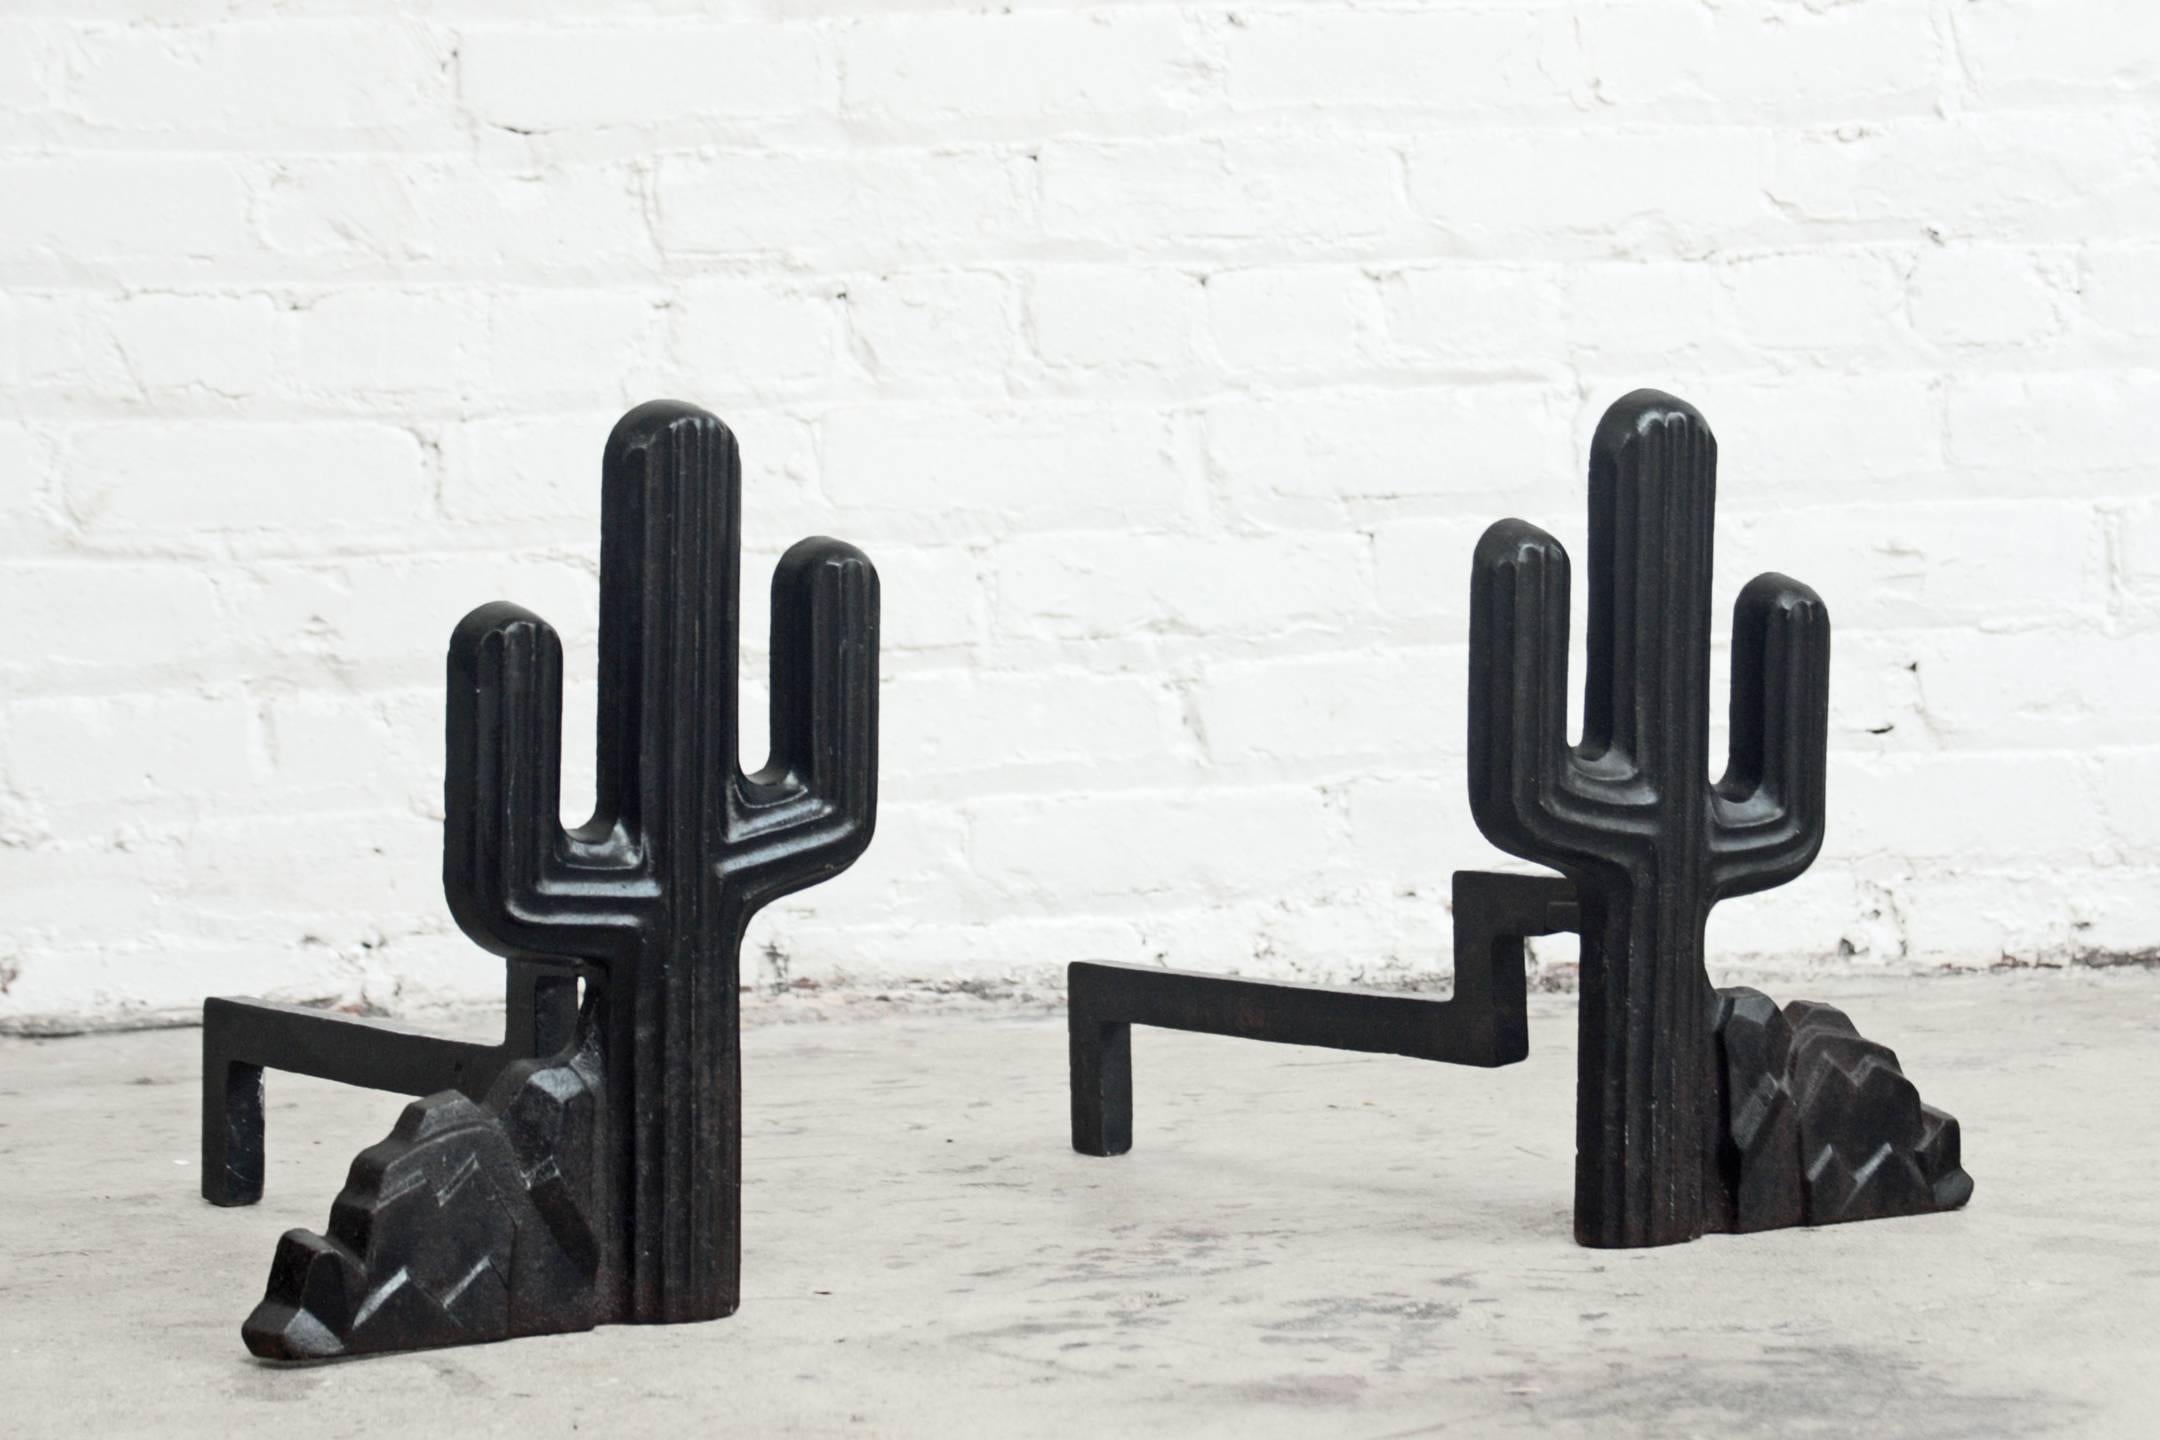 Pair of cast iron andirons in the form of cacti / cactus. The perfect fireplace decor for the desert Ranch house.